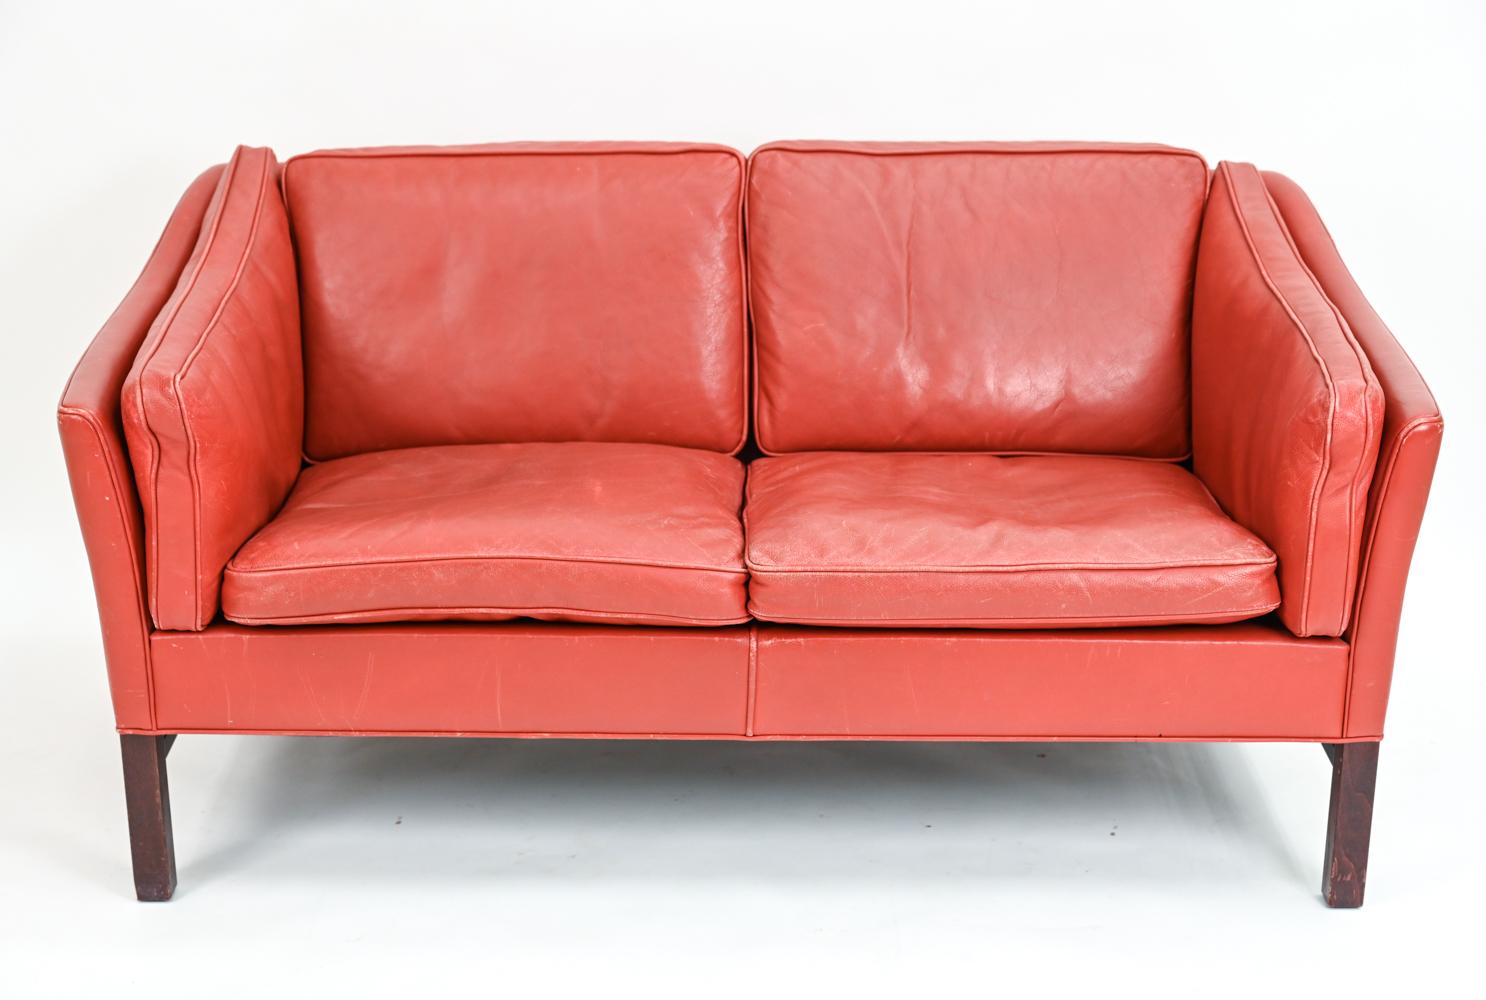 Danish Modern Leather Sofa Suite by Grant Mobelfabrik, c. 1970's For Sale 4